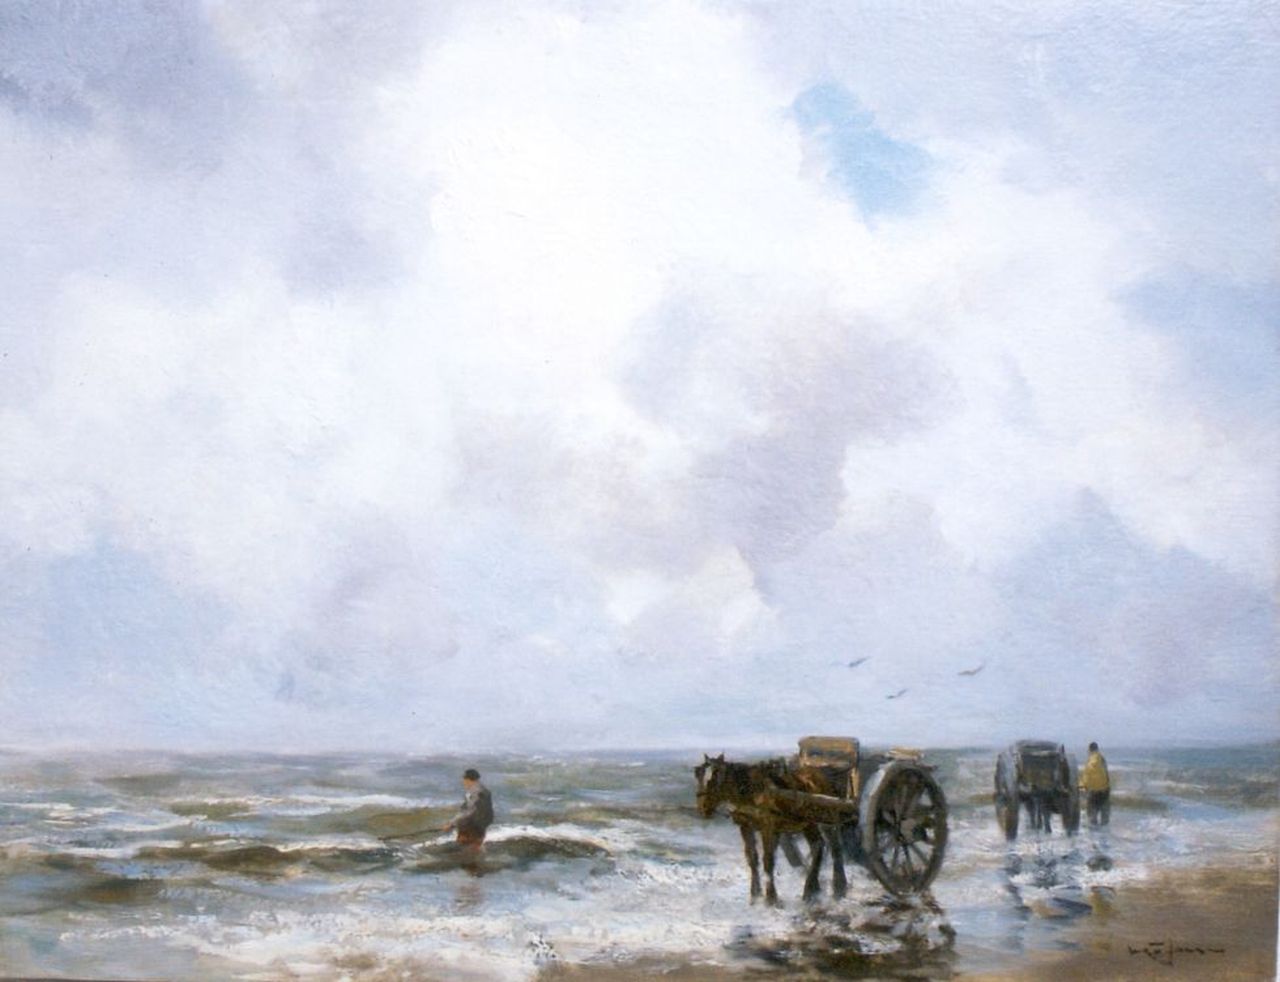 Jansen W.G.F.  | 'Willem' George Frederik Jansen, A shell-gatherer in the surf, oil on canvas 50.1 x 65.5 cm, signed l.r.